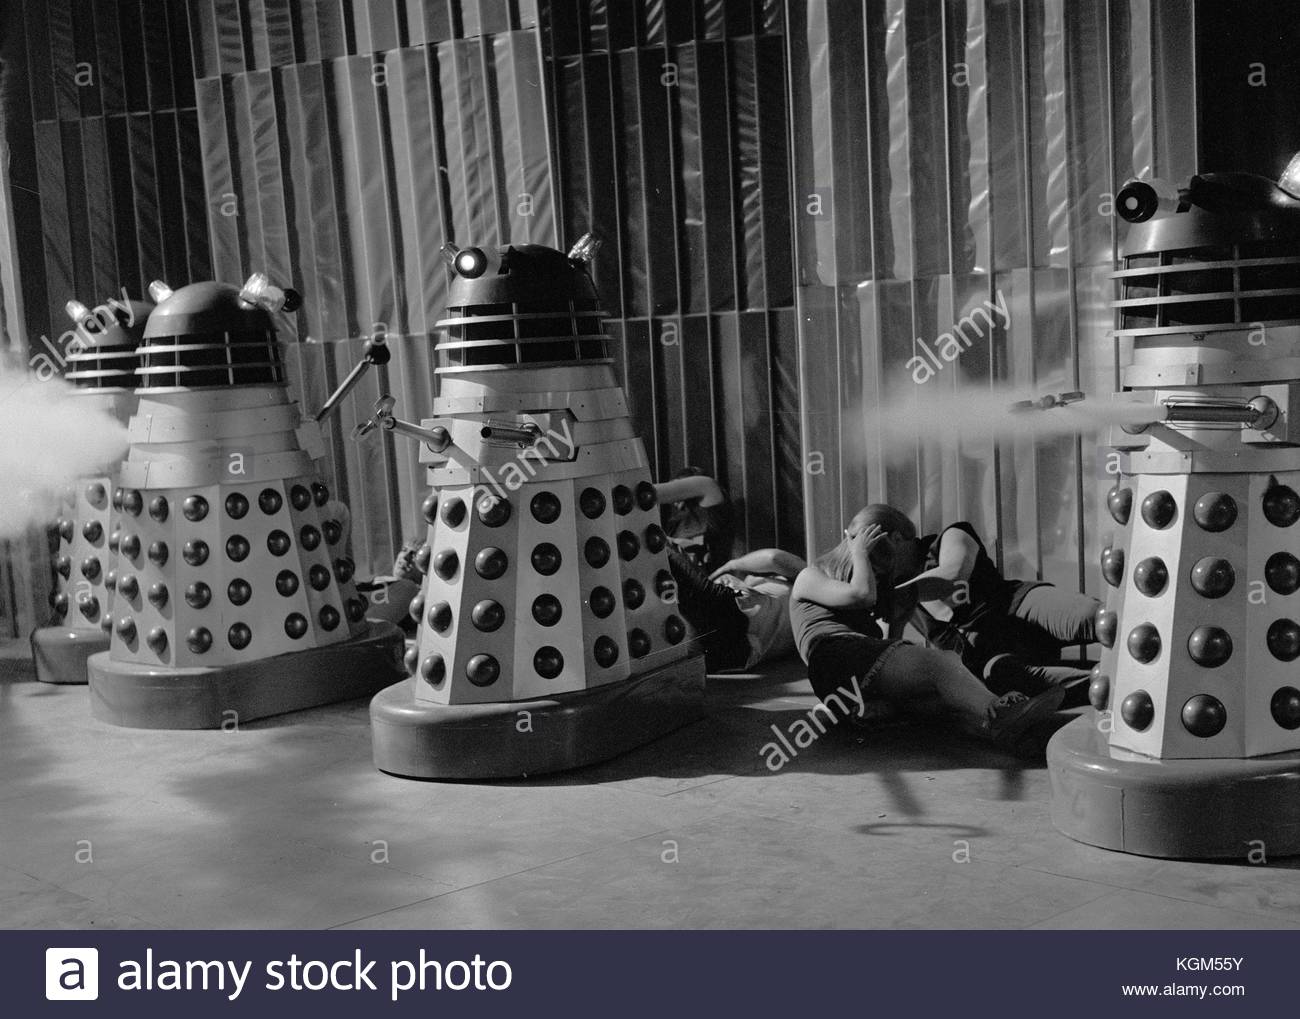 dr-who-and-the-daleks-1966-date-1965-KGM55Y.jpg